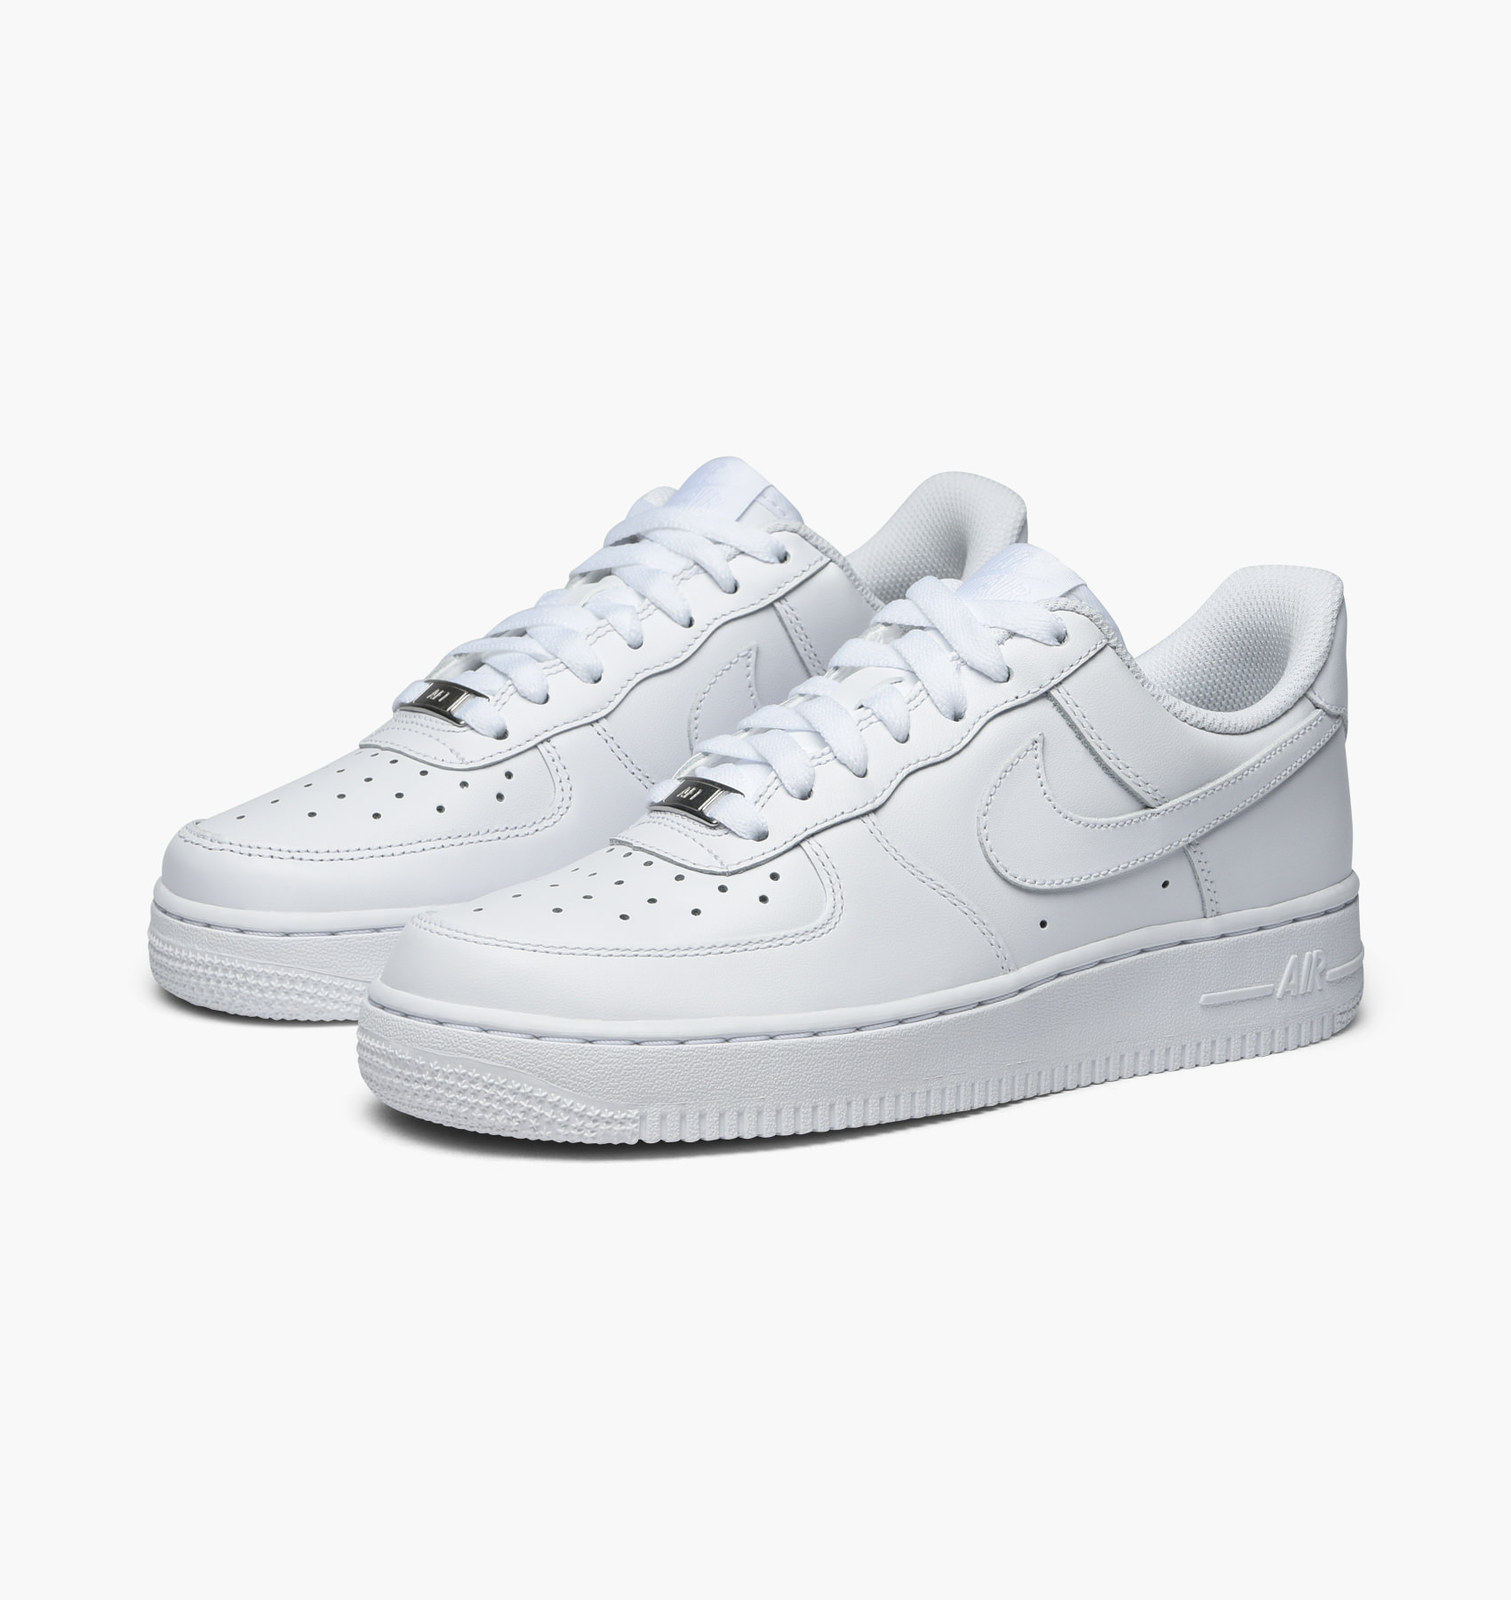 nike air force 1 size 6 womens cheap online